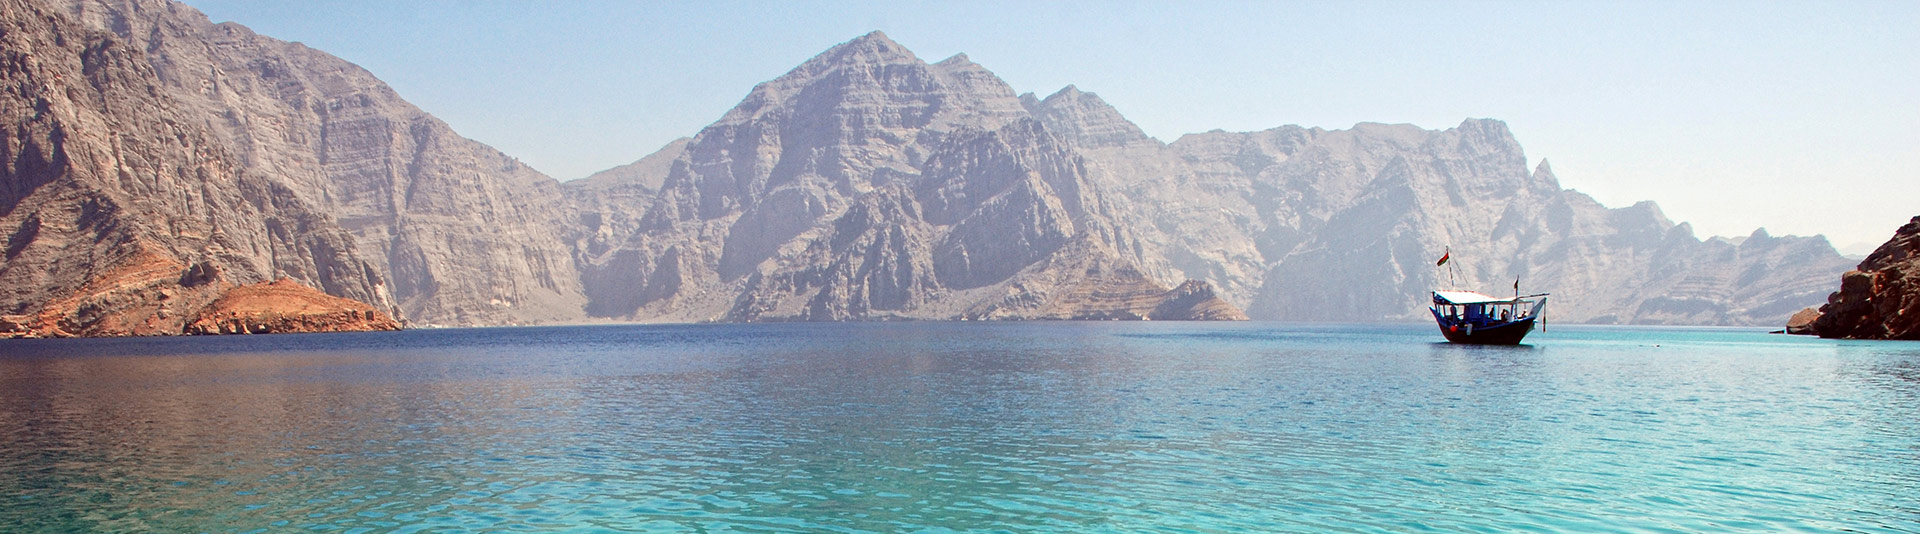 Rent a Yacht to Explore Oman